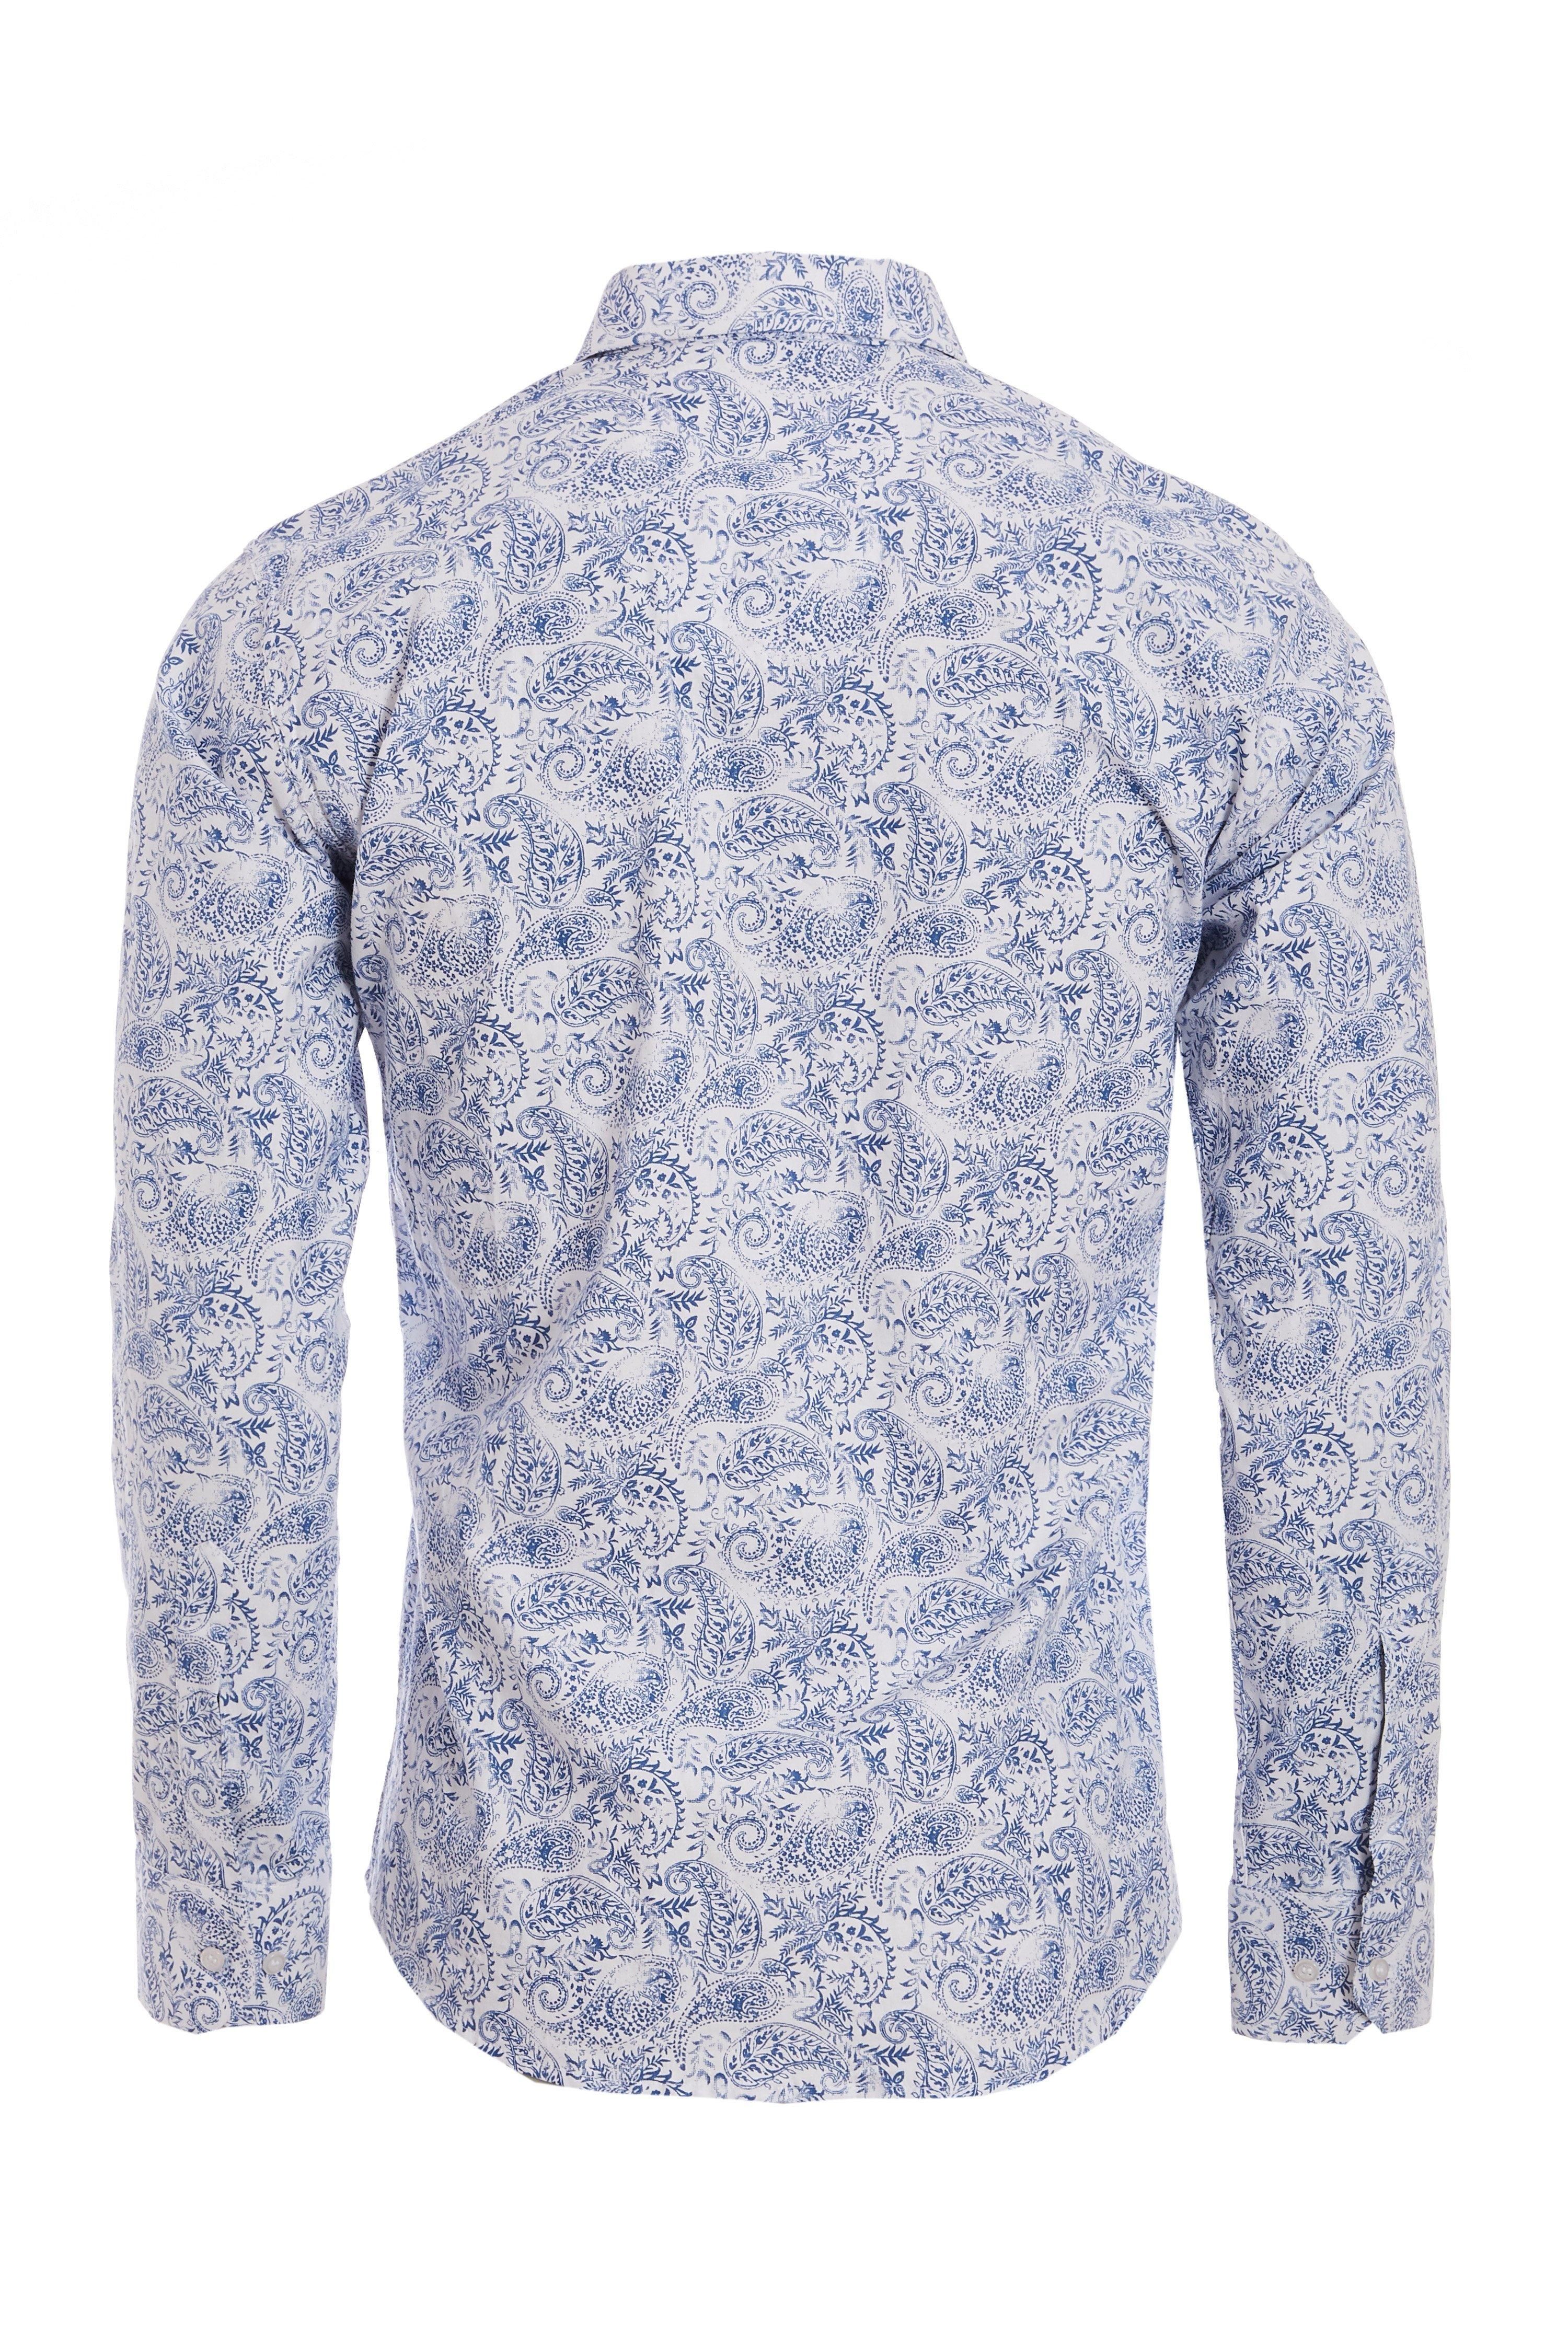 All Over Paisley Print  	Slim Fit  	Classic Pointed Collar  	White Button Through Fastening